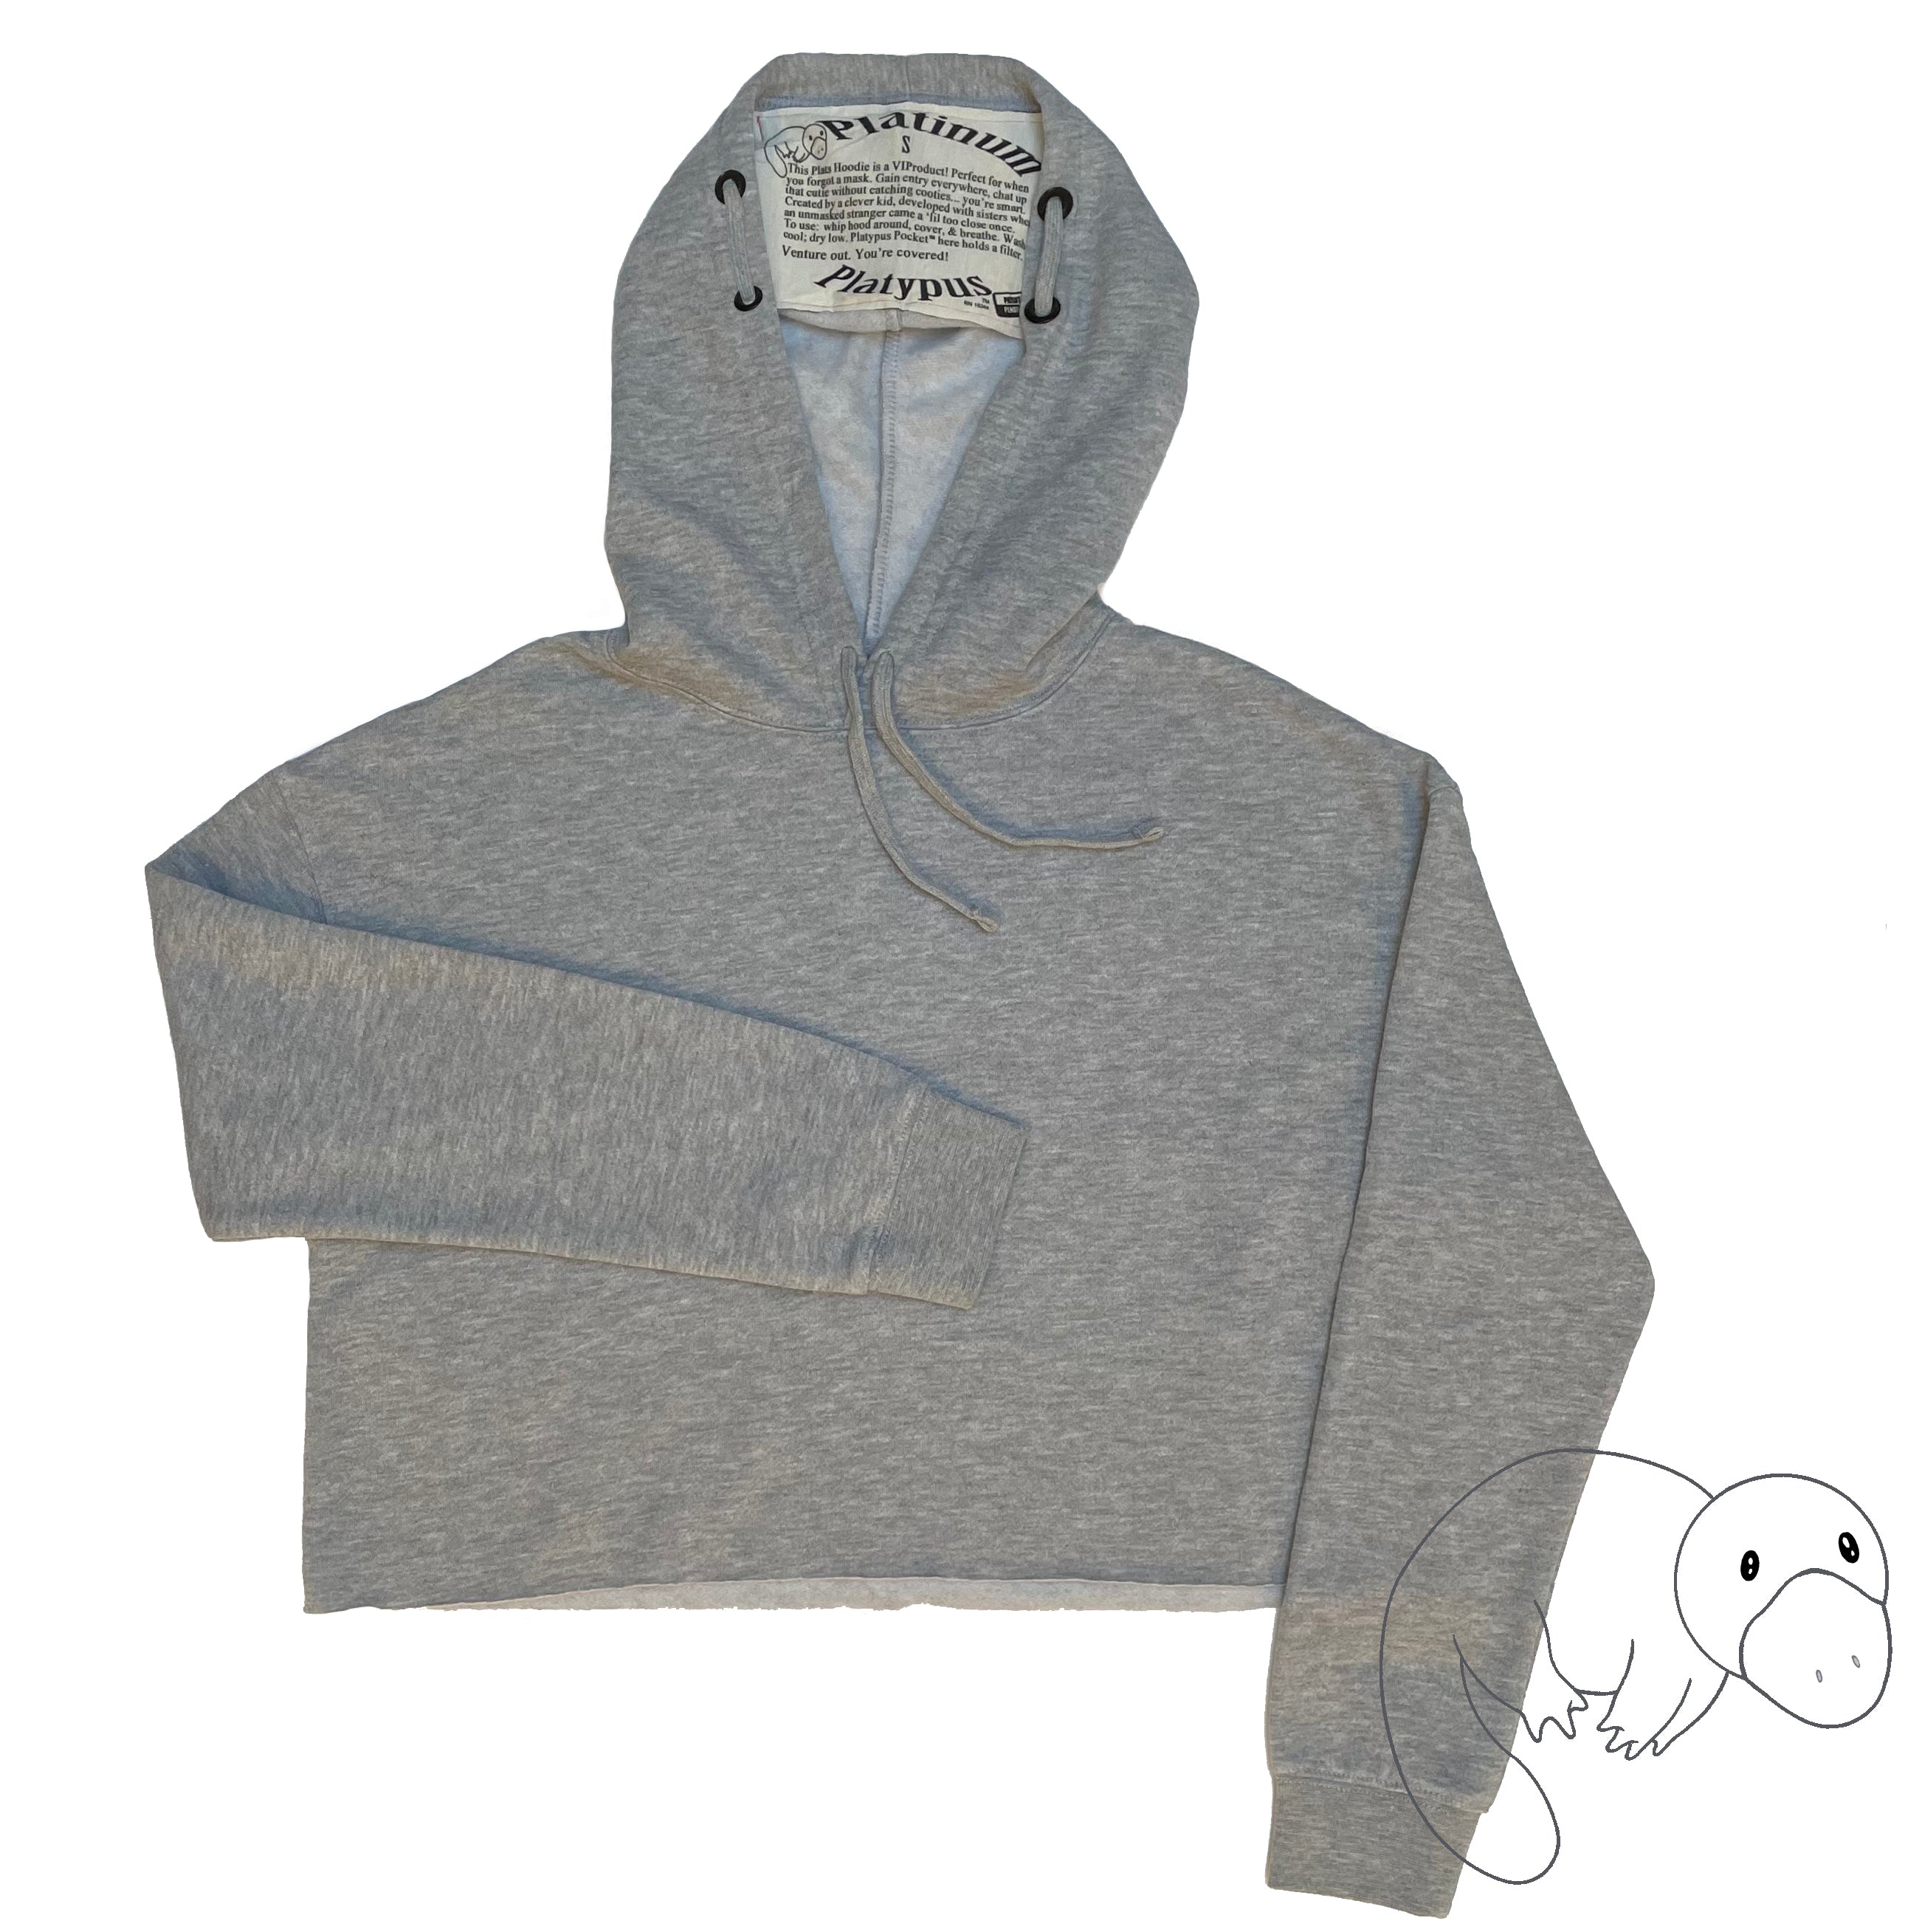 grey-hooded-sweatshirt-blank-crop-light-soft-hoodie-face-mask-facemaskhoodie-Plats-Hoodie-facemask-all-in-one-2-earlooops-convertible-hoodiefacemask-platinum-platypus-new-product